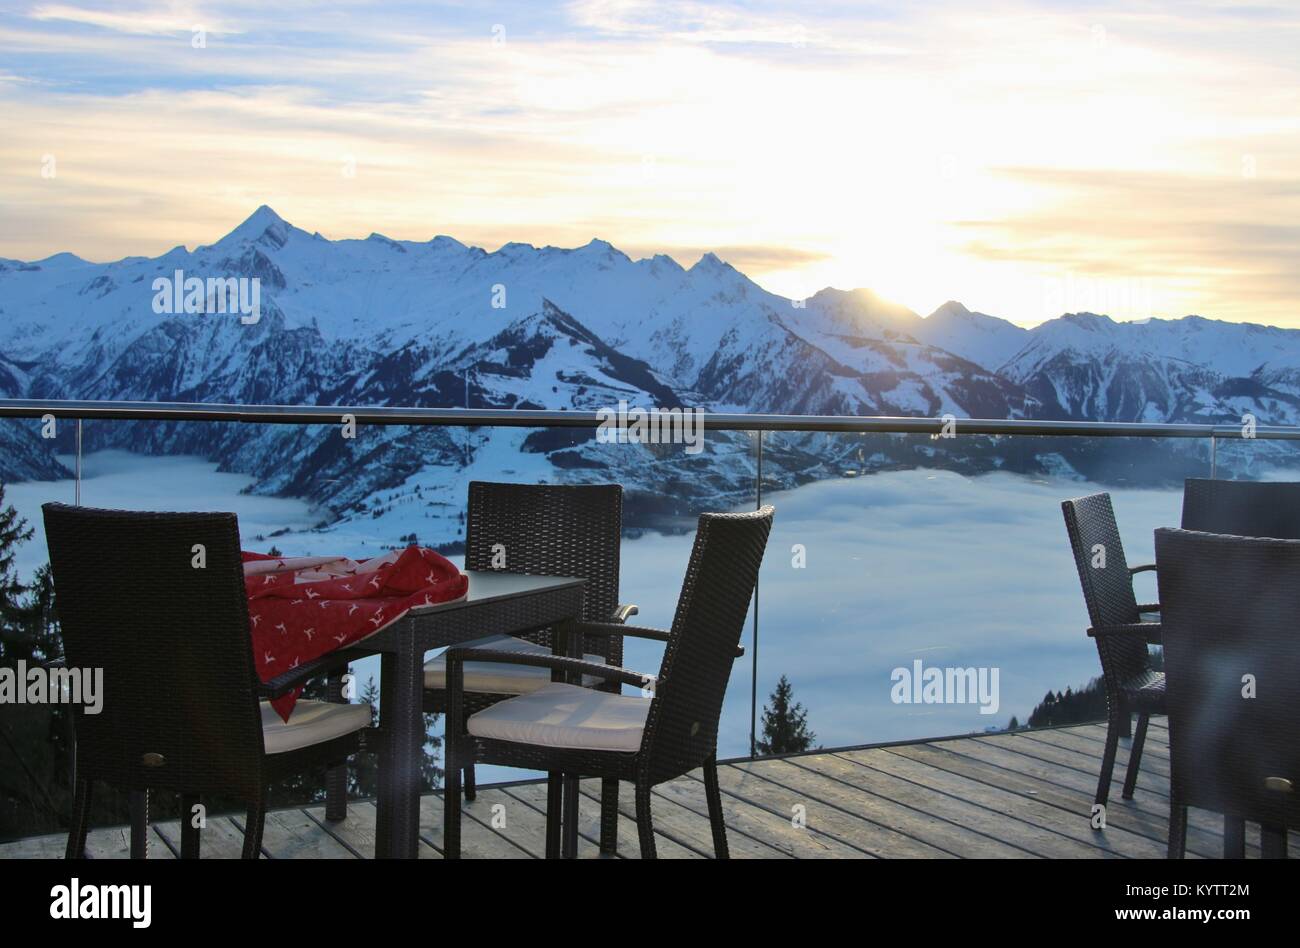 Chairs on a cafe terrace in the mountains and view of the Hohe Tauern mountain range in the region Zell am See - Kaprun, in winter. Austria, Europe. Stock Photo